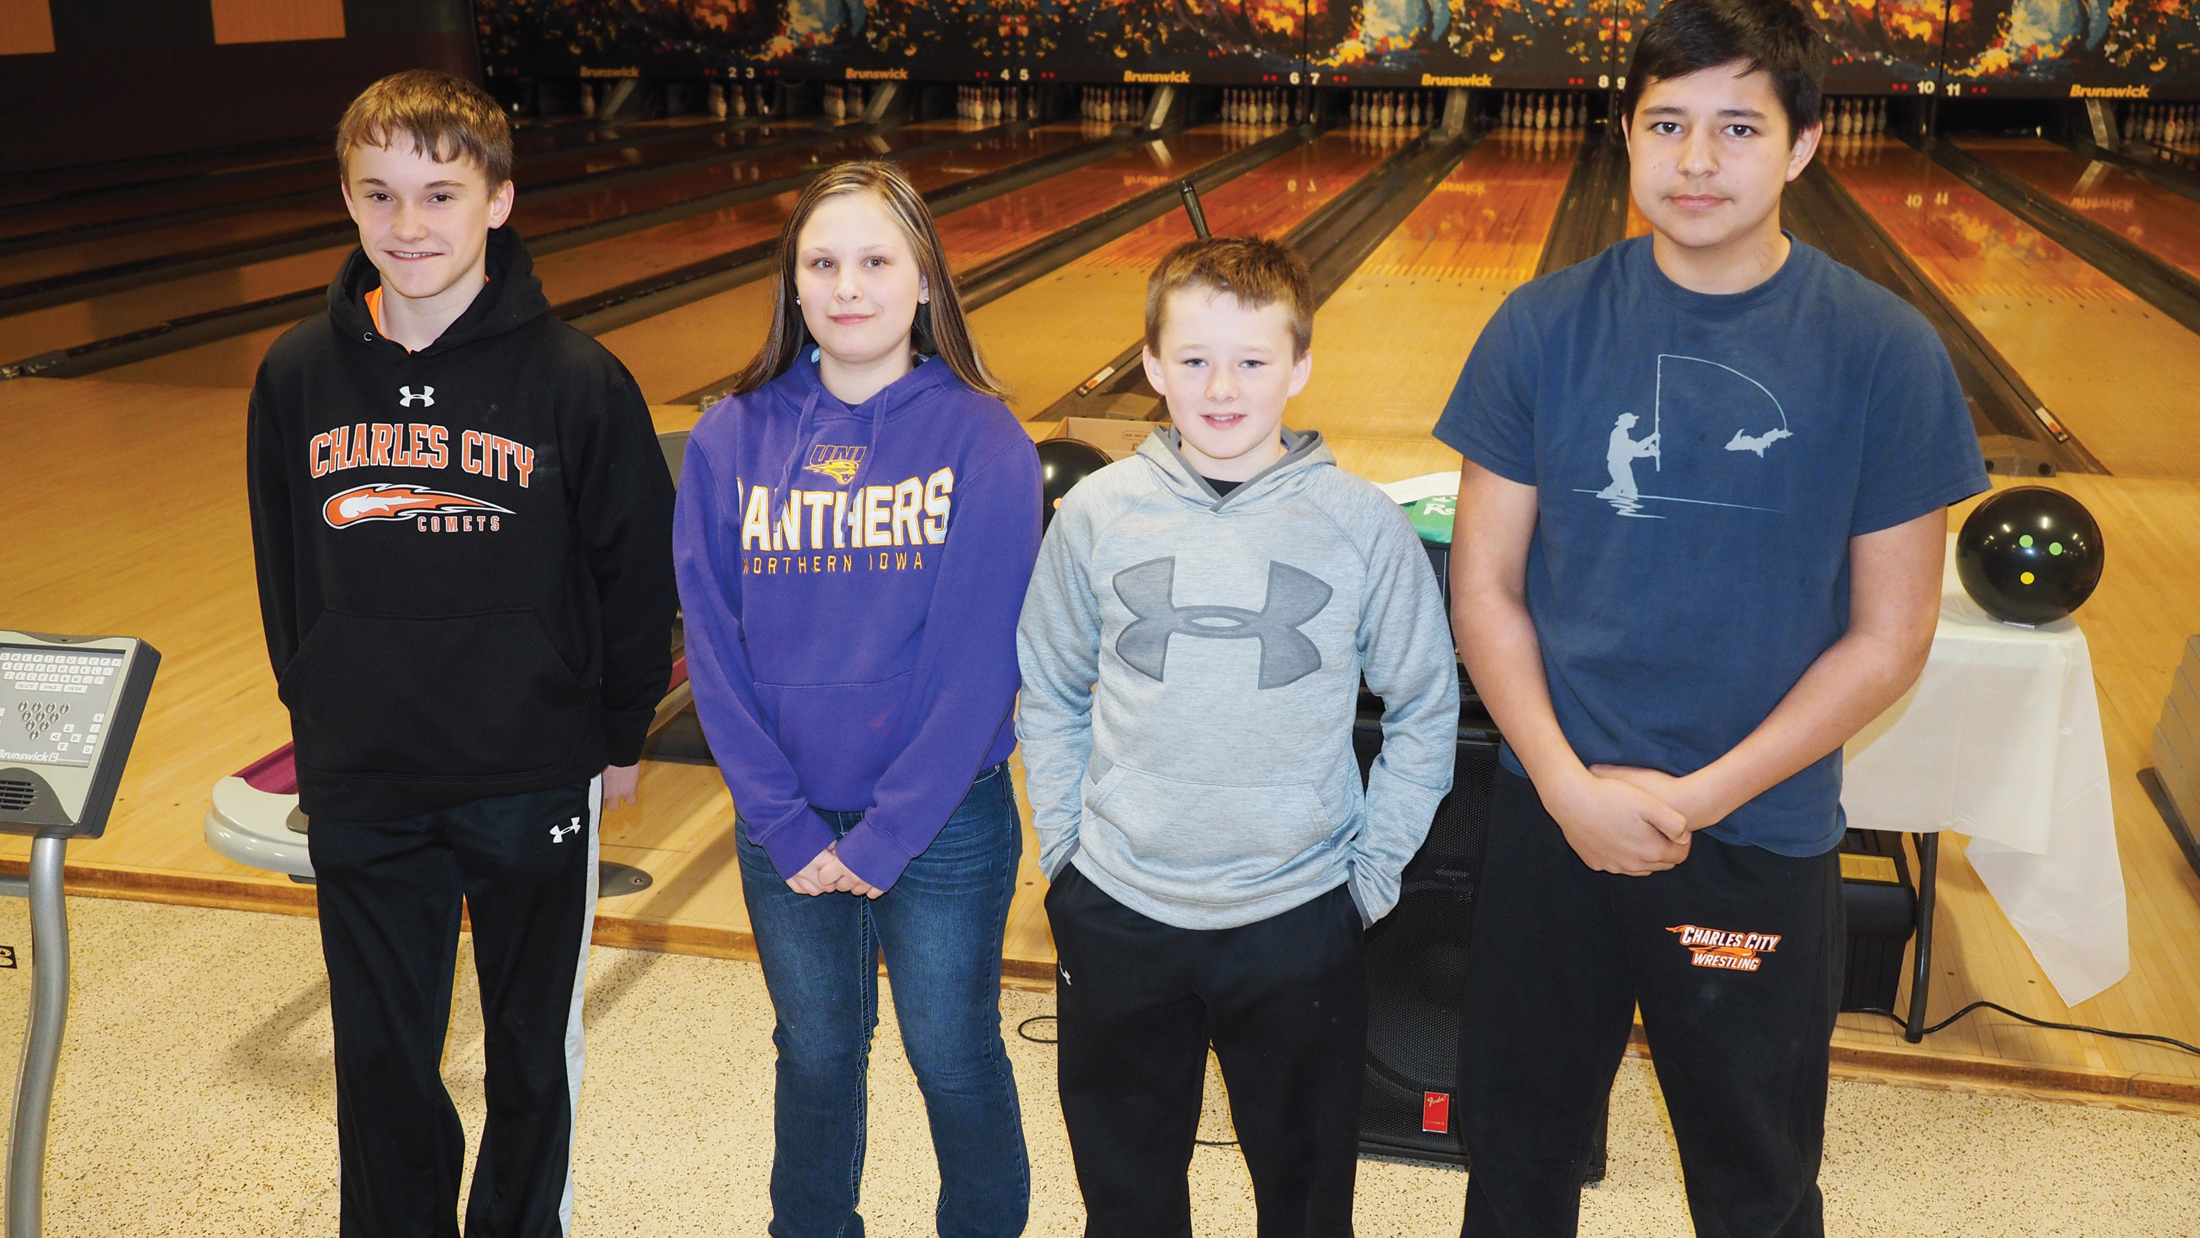 Charles City bowlers take second and Middle School State Tournament